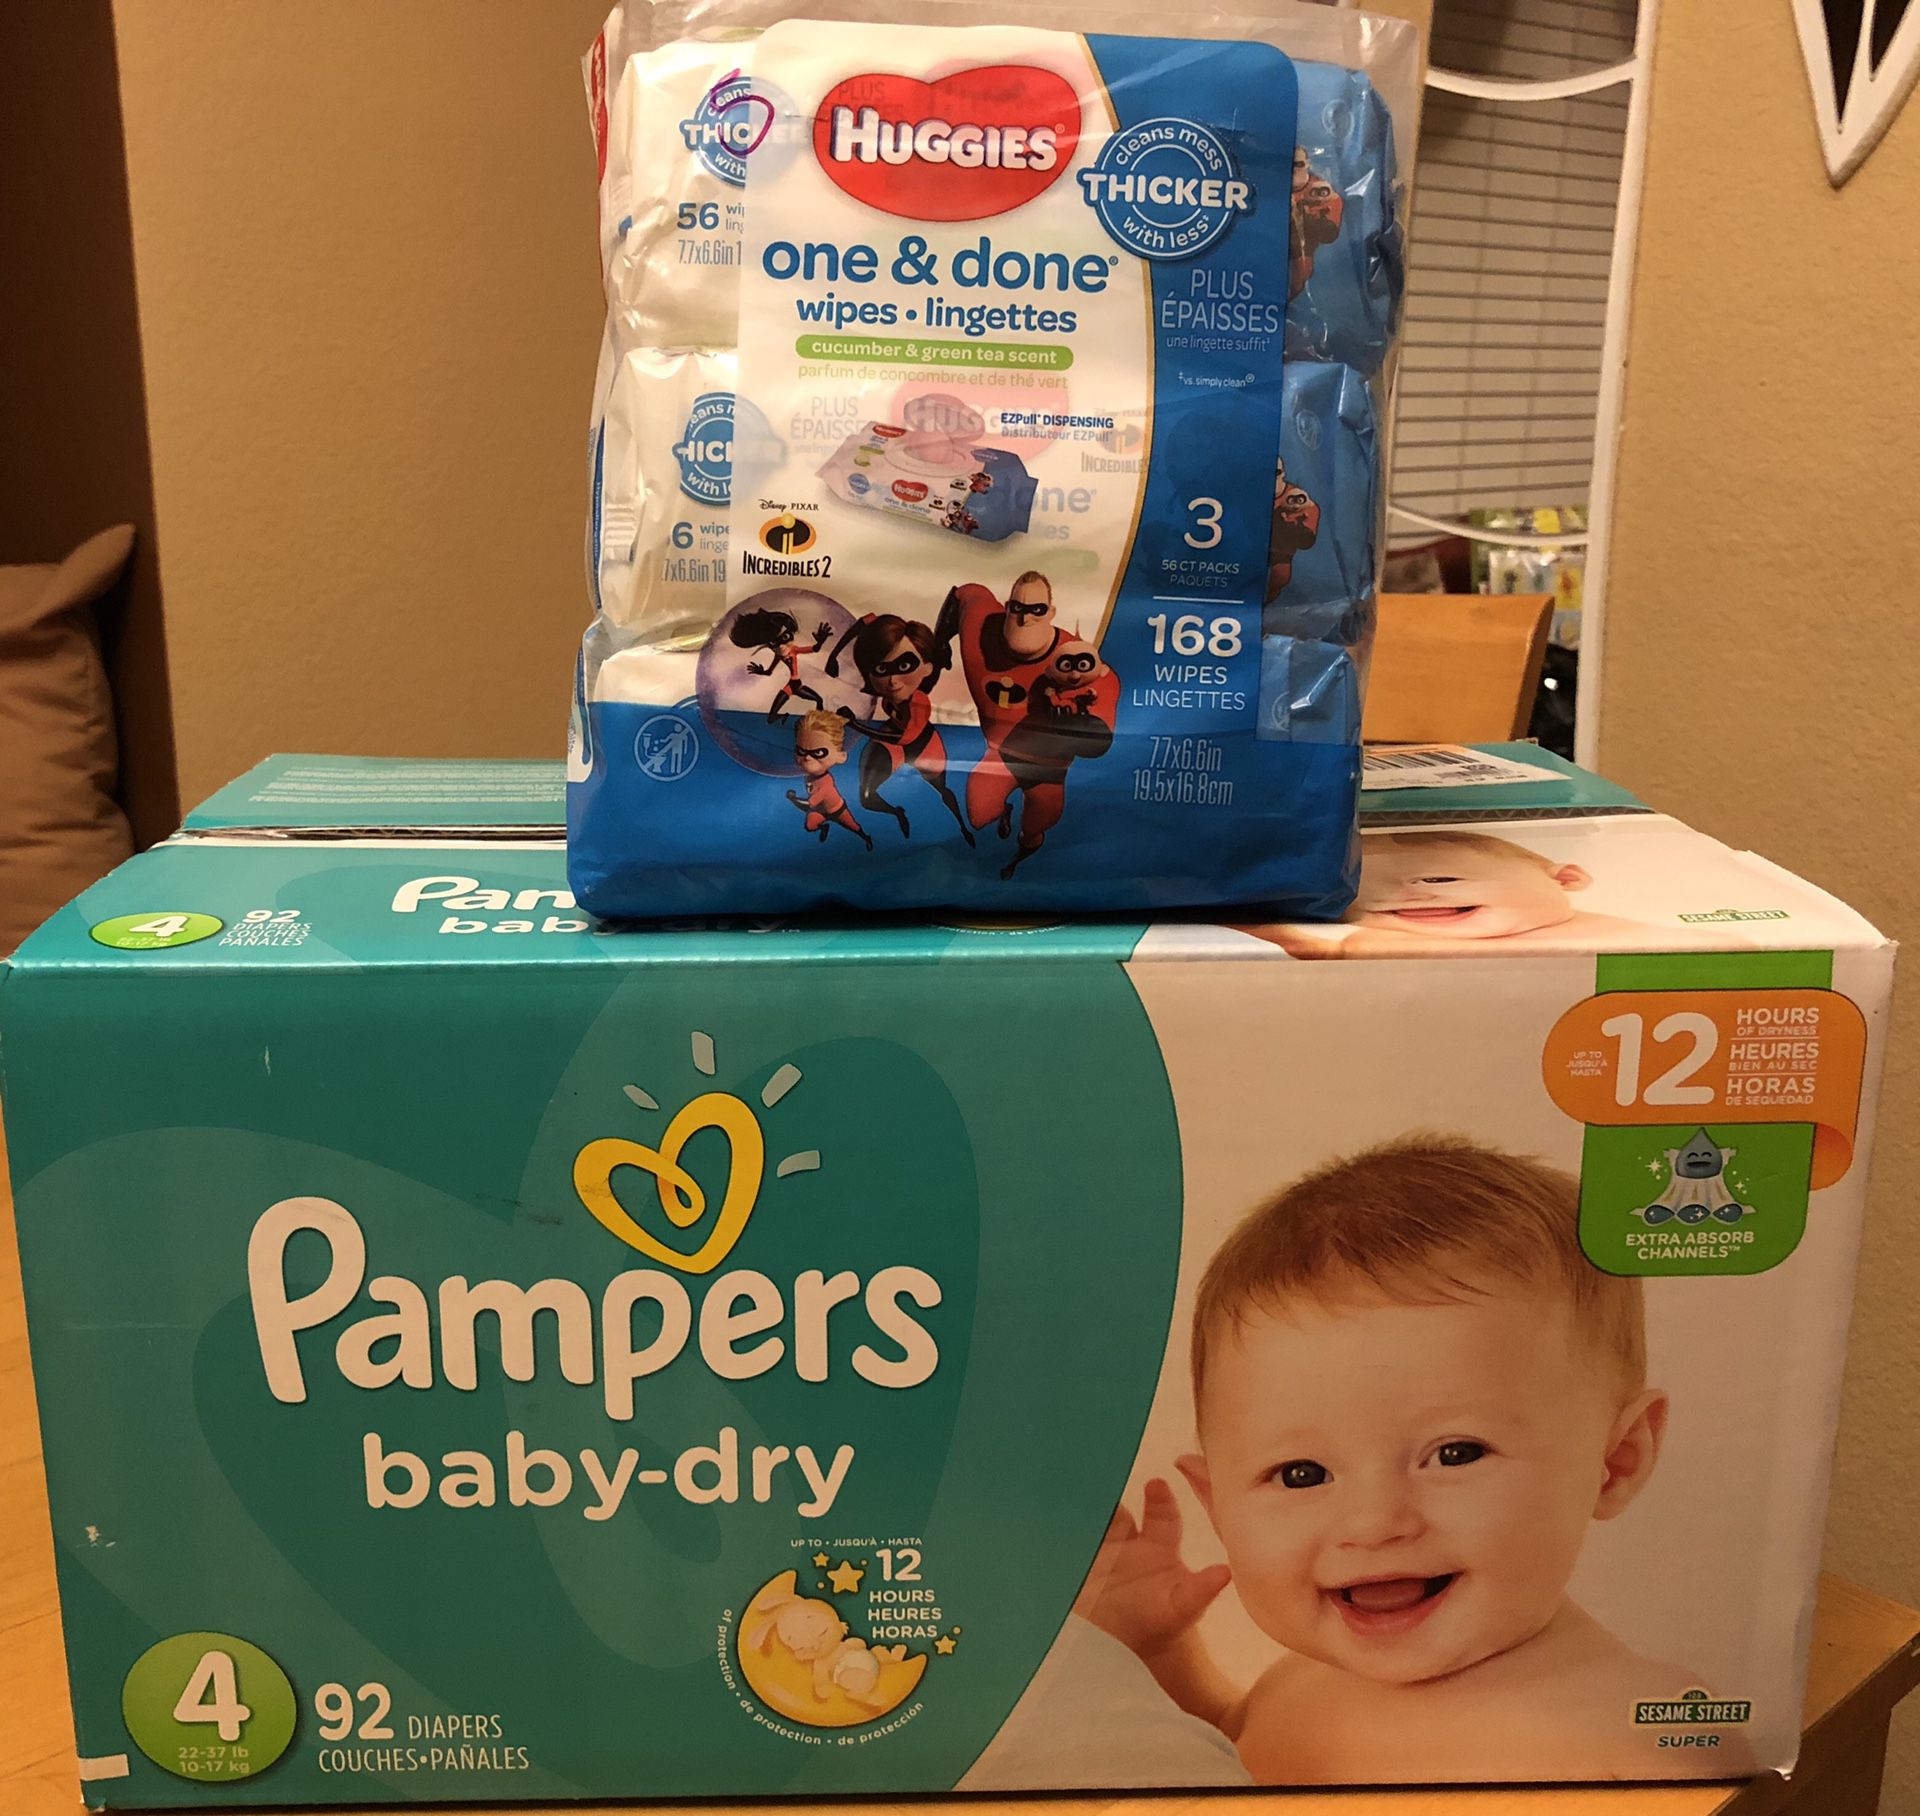 Diaper and wipes bundle